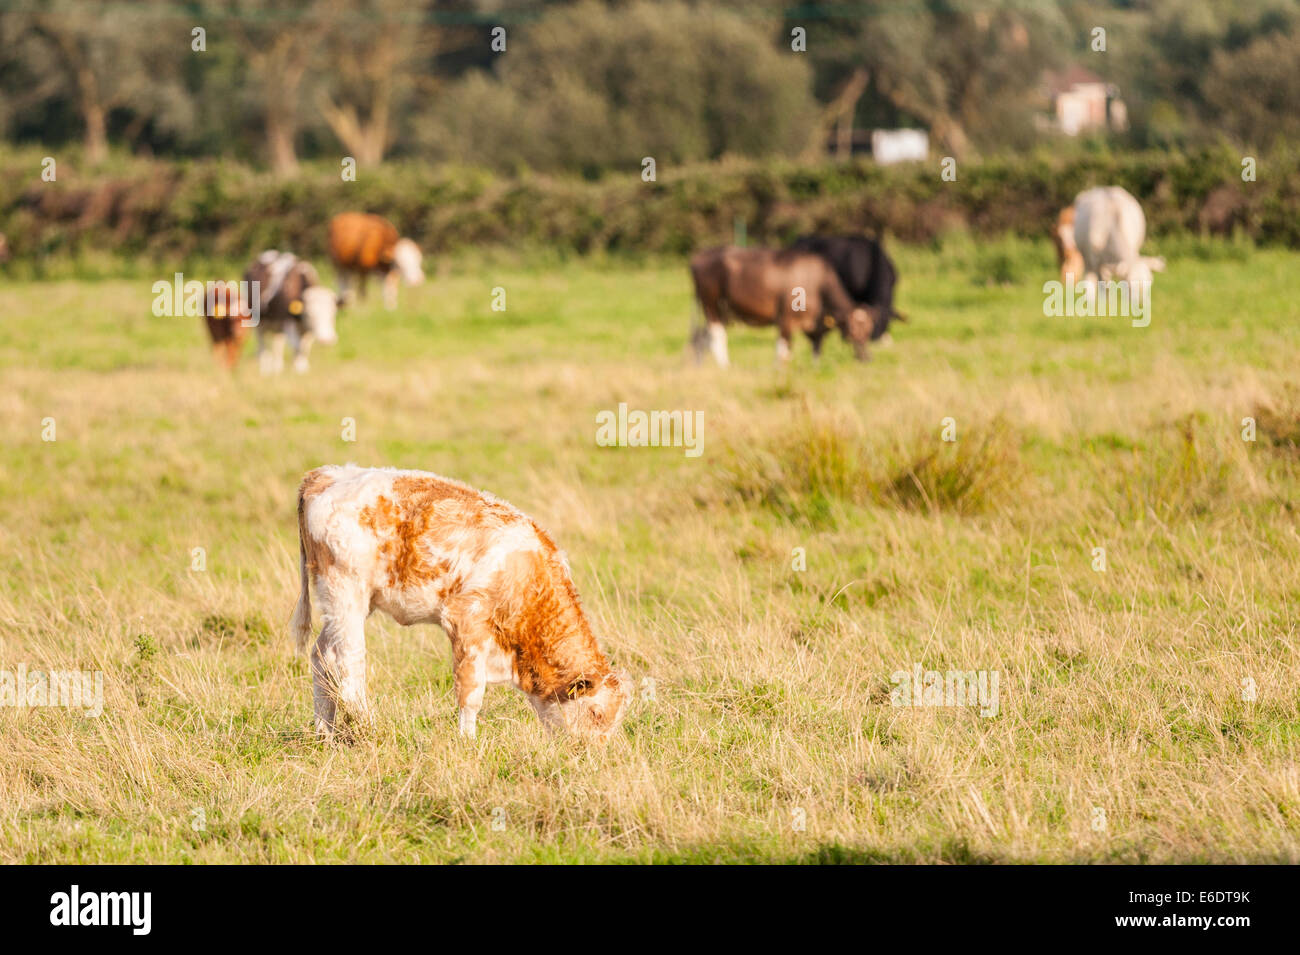 A calf in a field of cows in the Uk Stock Photo